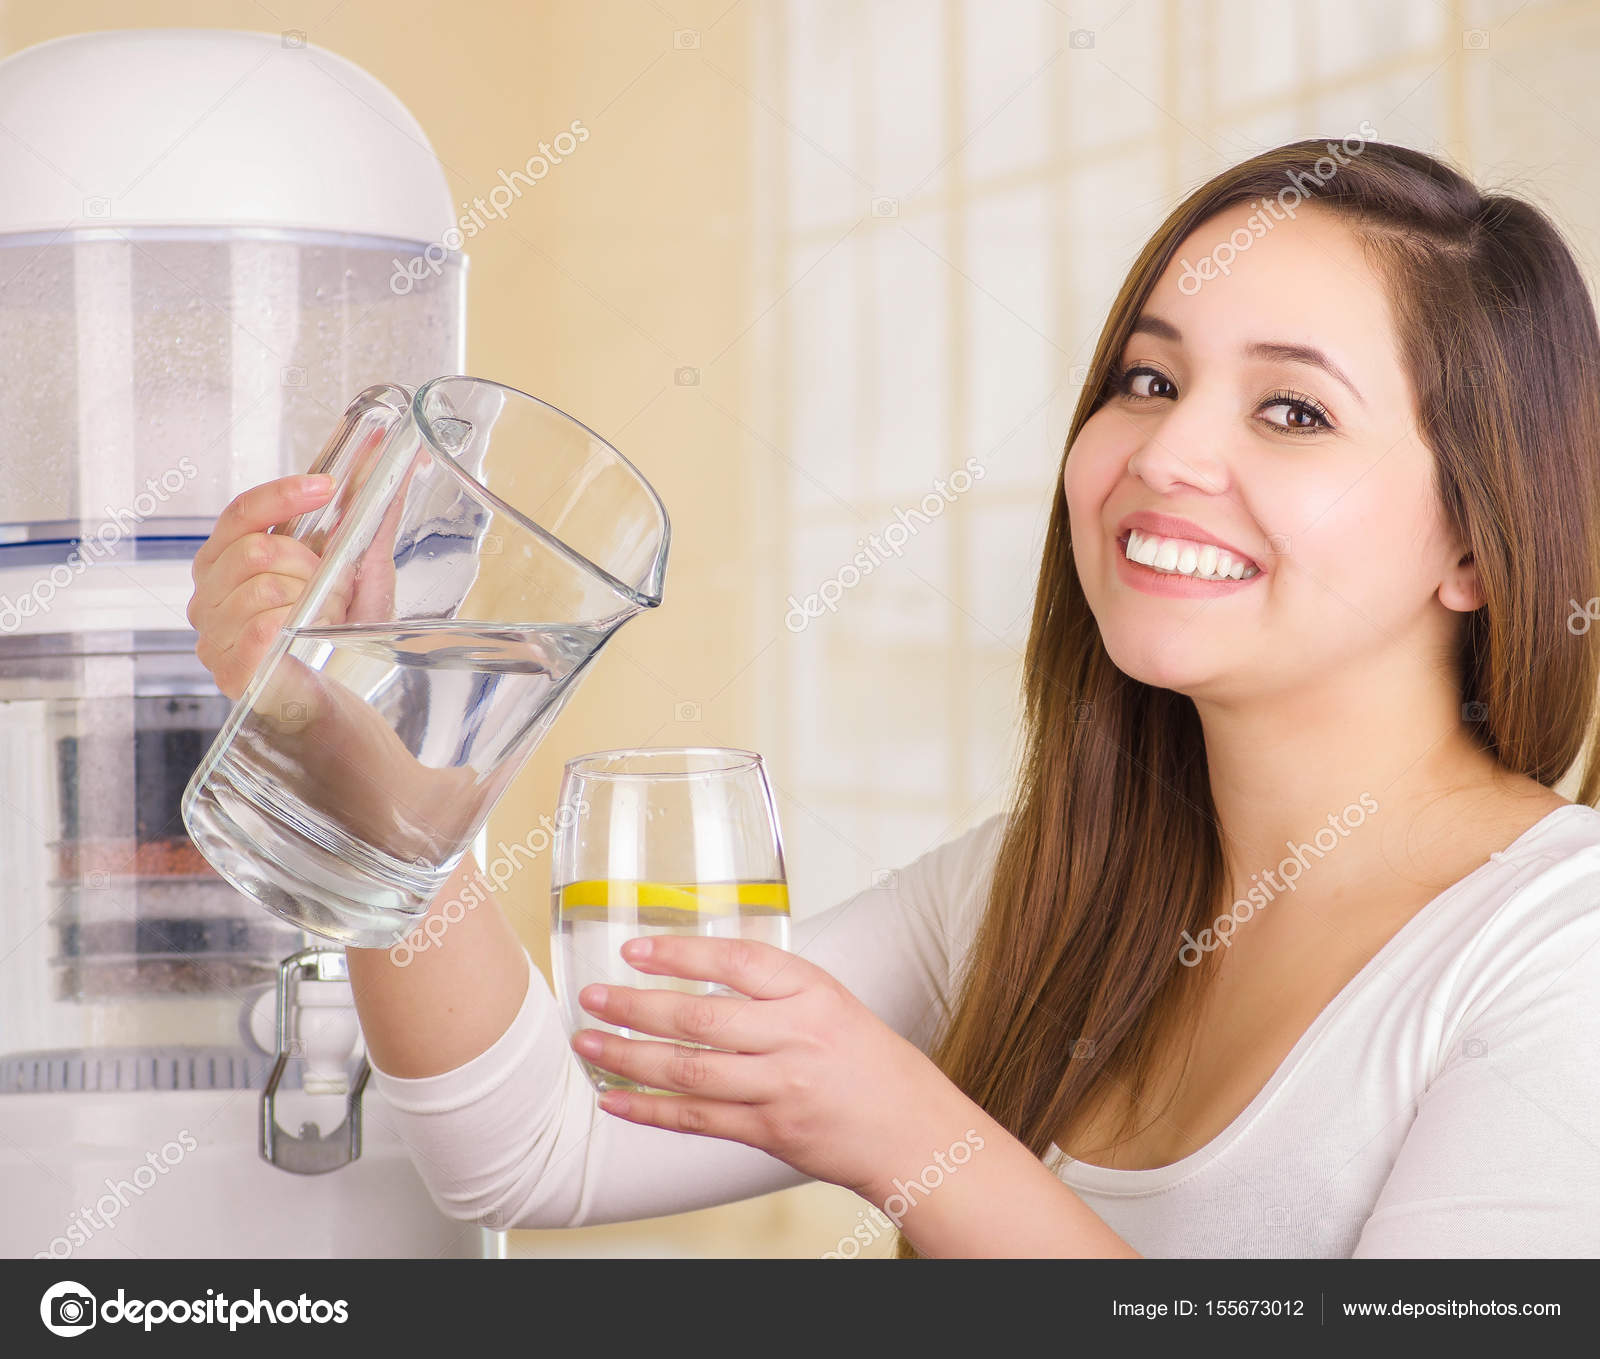 Beautiful smiling woman holding a glass of water in one hand and a pitcher  of water in her other hand, with a filter system of water purifier on a  kitchen background Stock